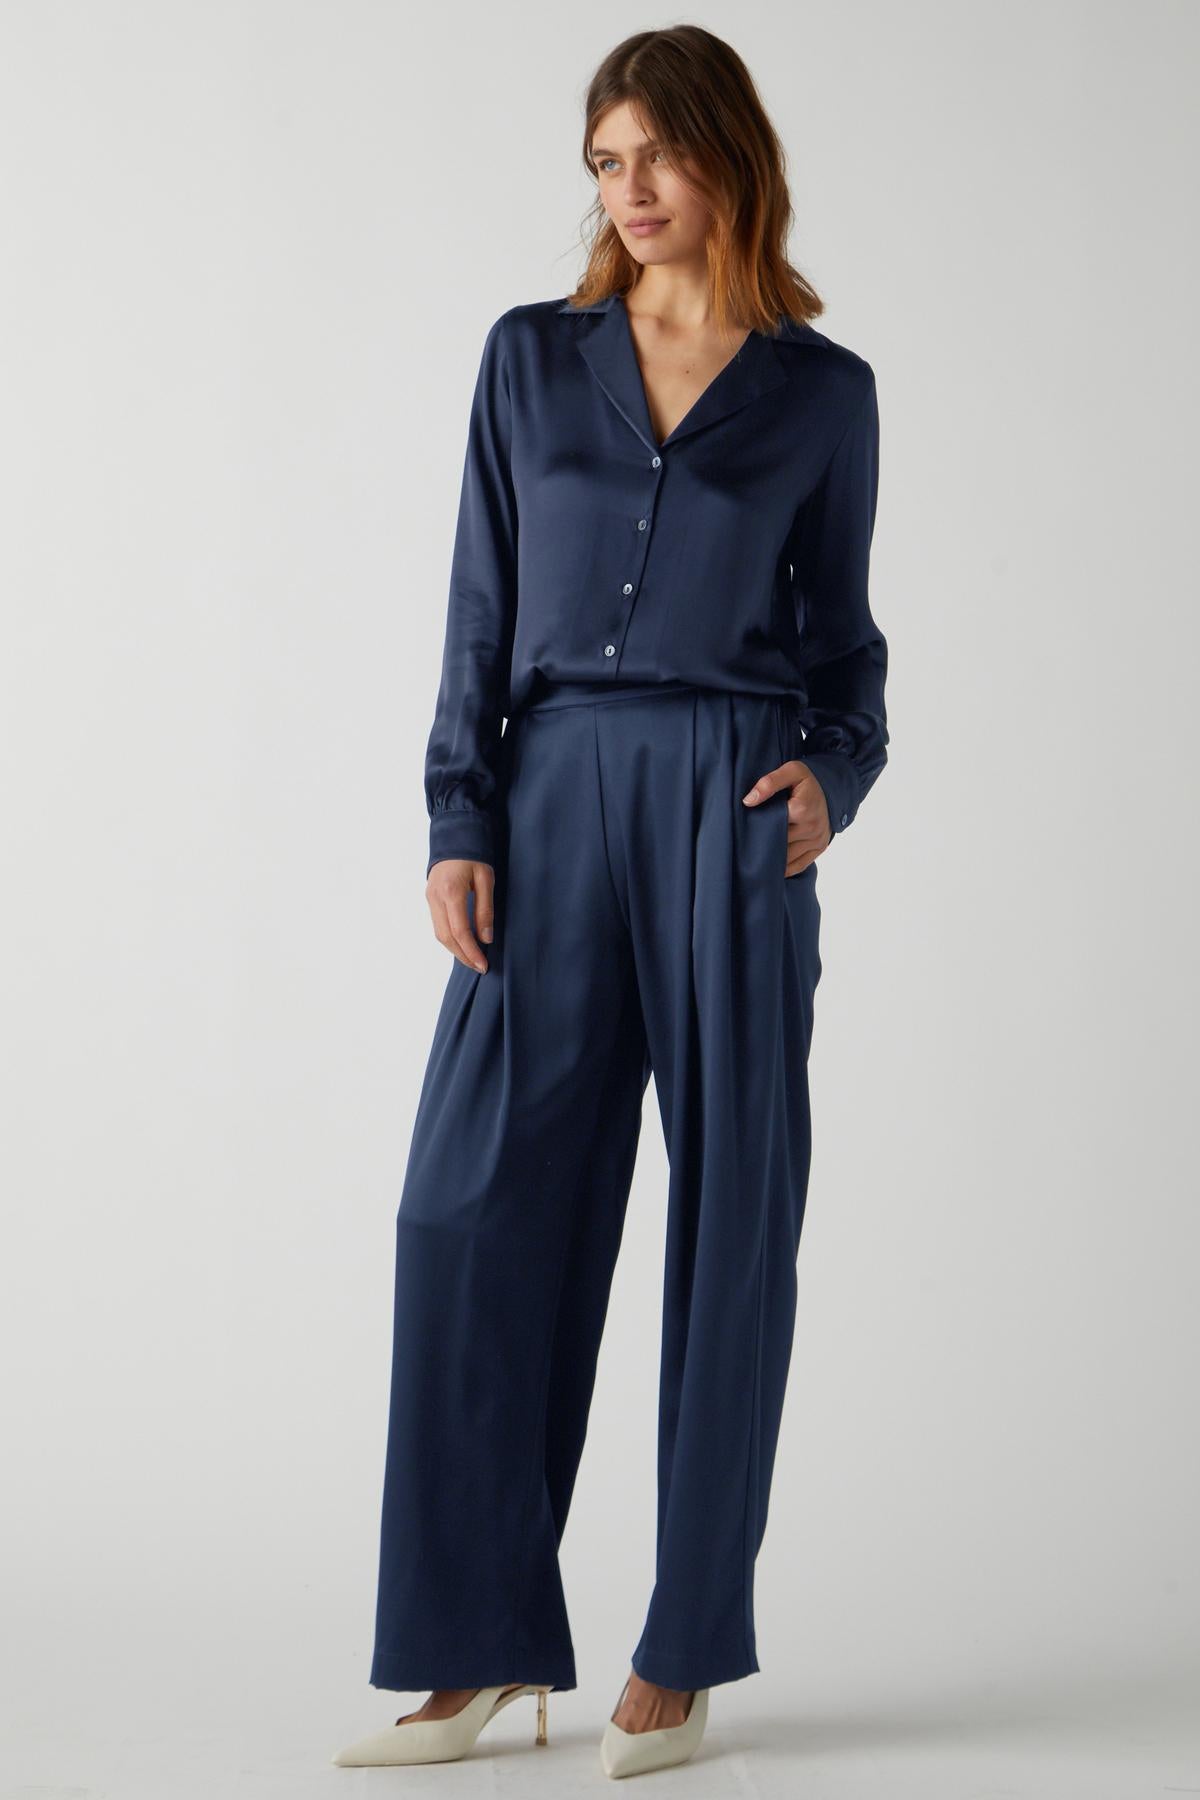 The model is wearing a Velvet by Jenny Graham MANHATTAN PANT jumpsuit for an elegant evening look.-35548078768321